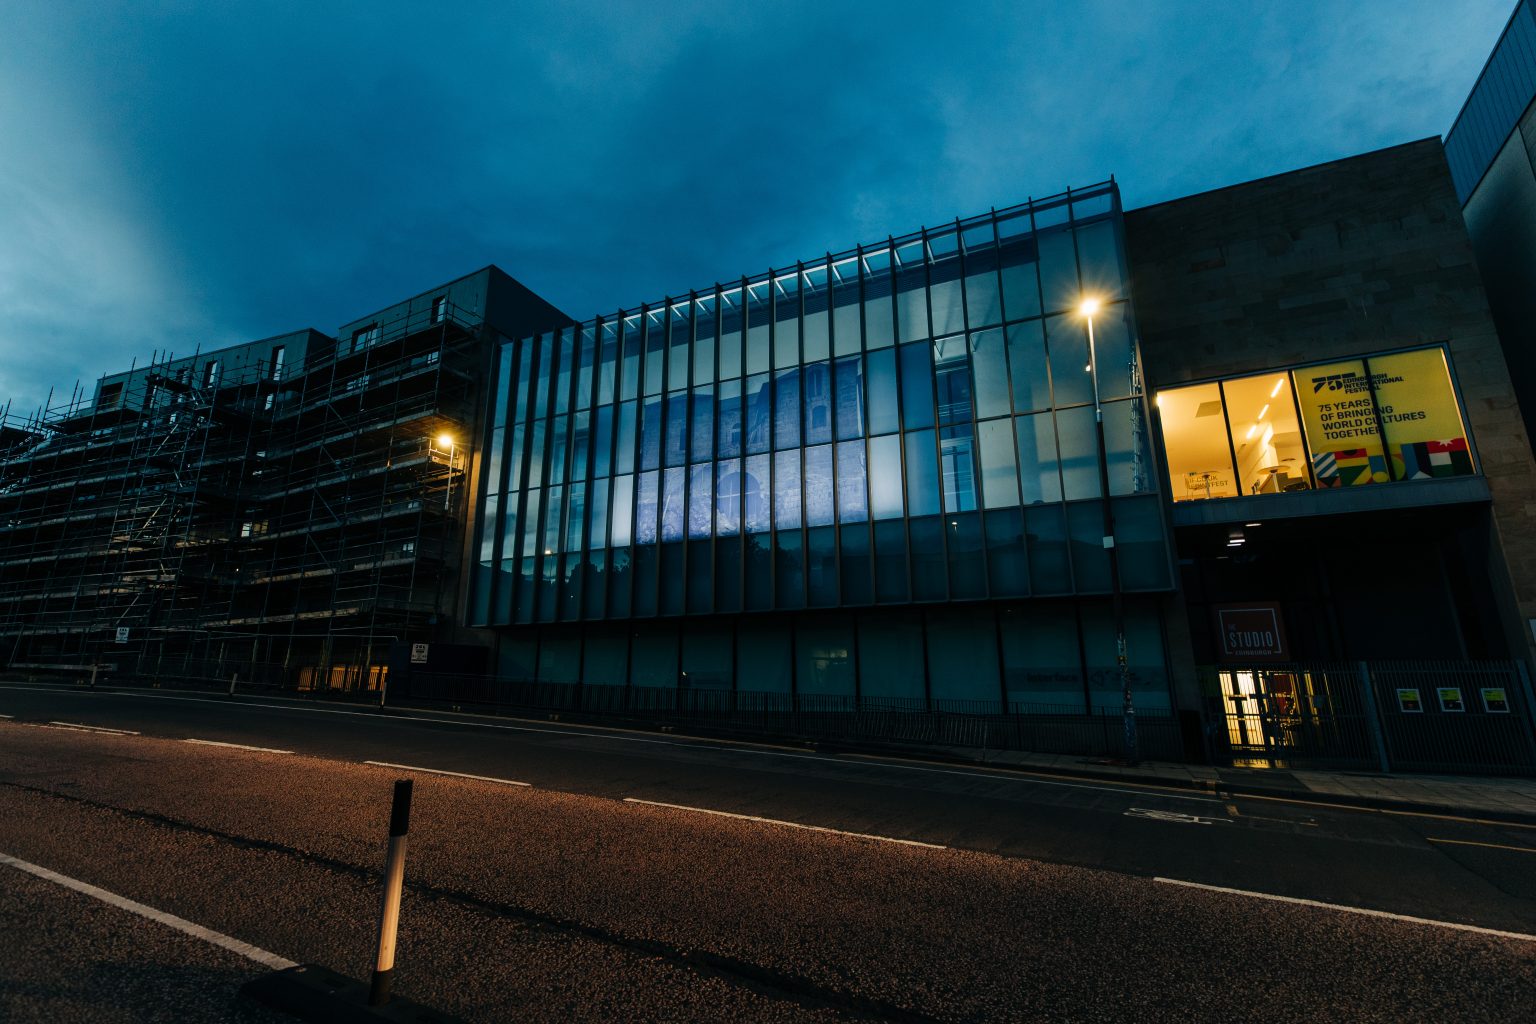 A modern building in Edinburgh at dusk. The facade is made of glass and iron. On the left of the building there is a poster advertising Edinburgh International Festival.